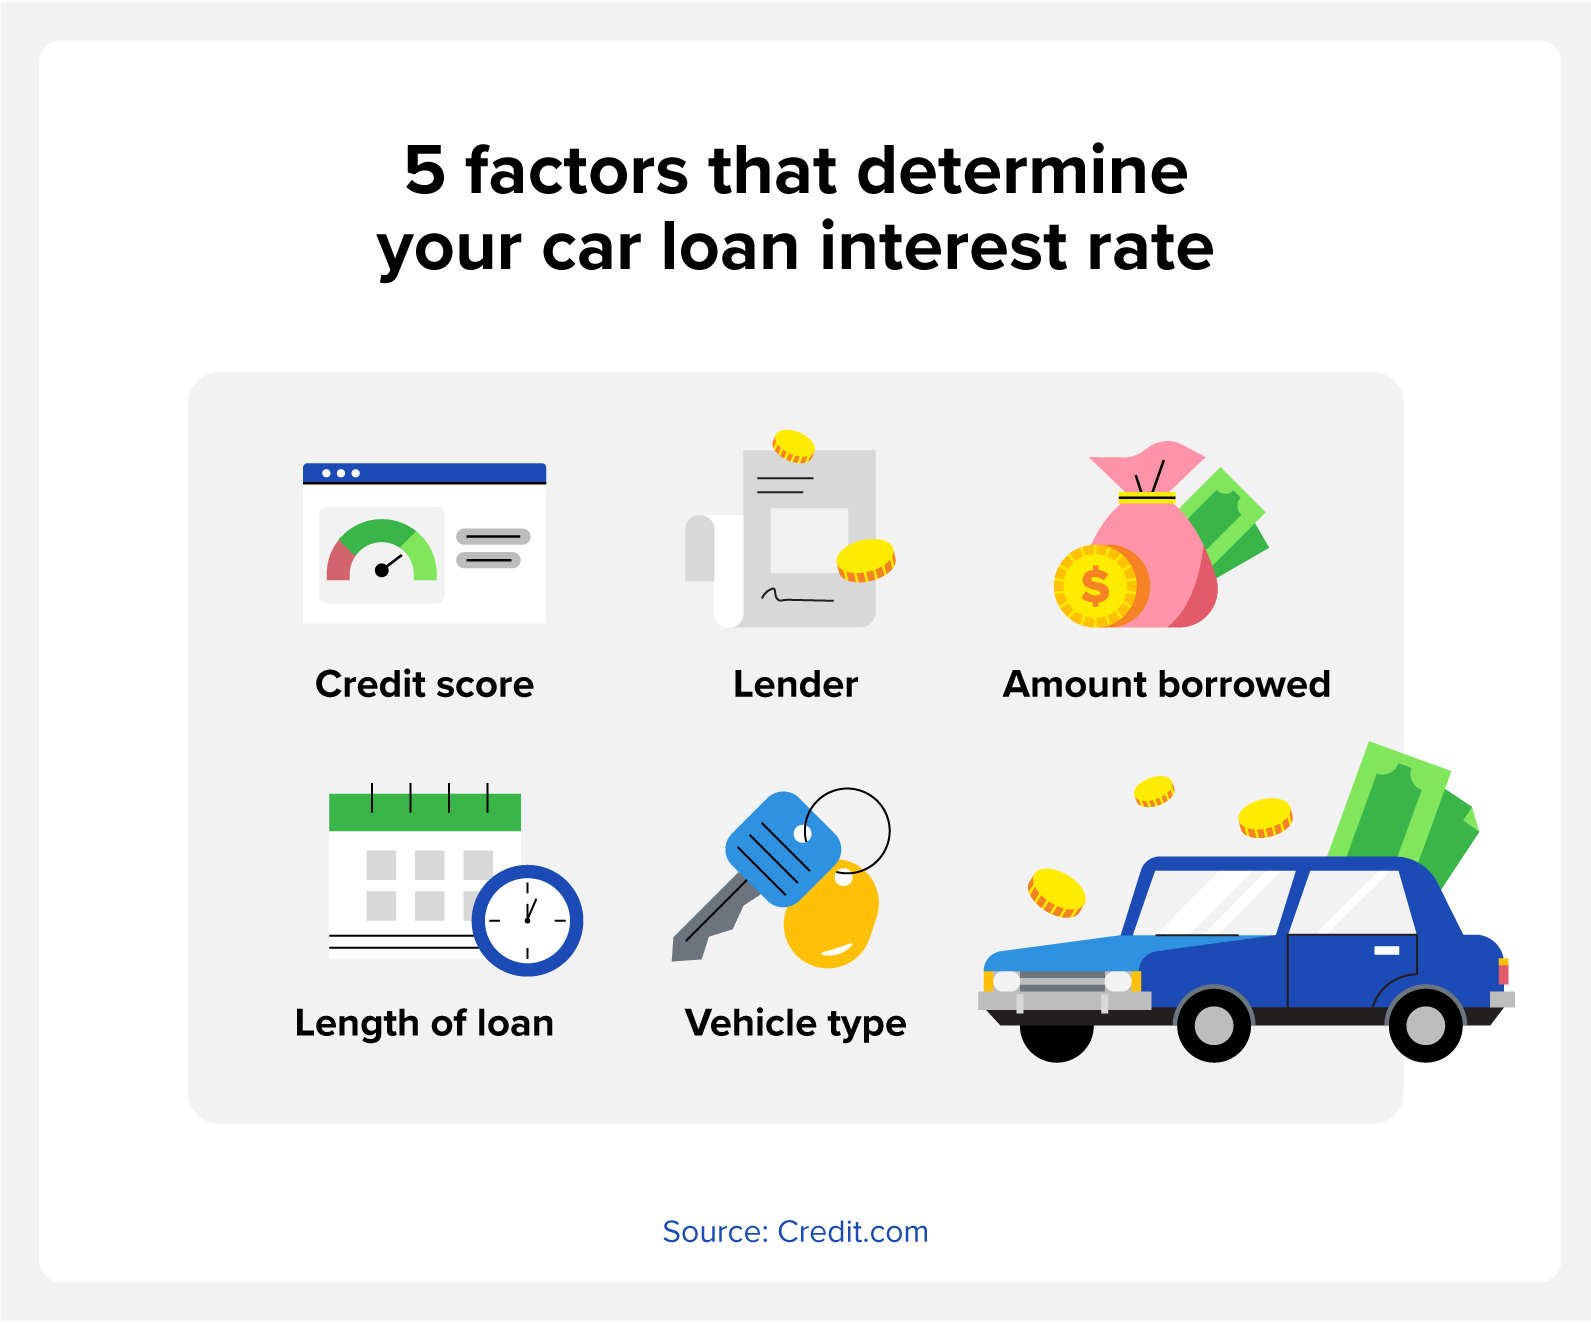 Which Credit Score Is Used for Car Loans? - Experian